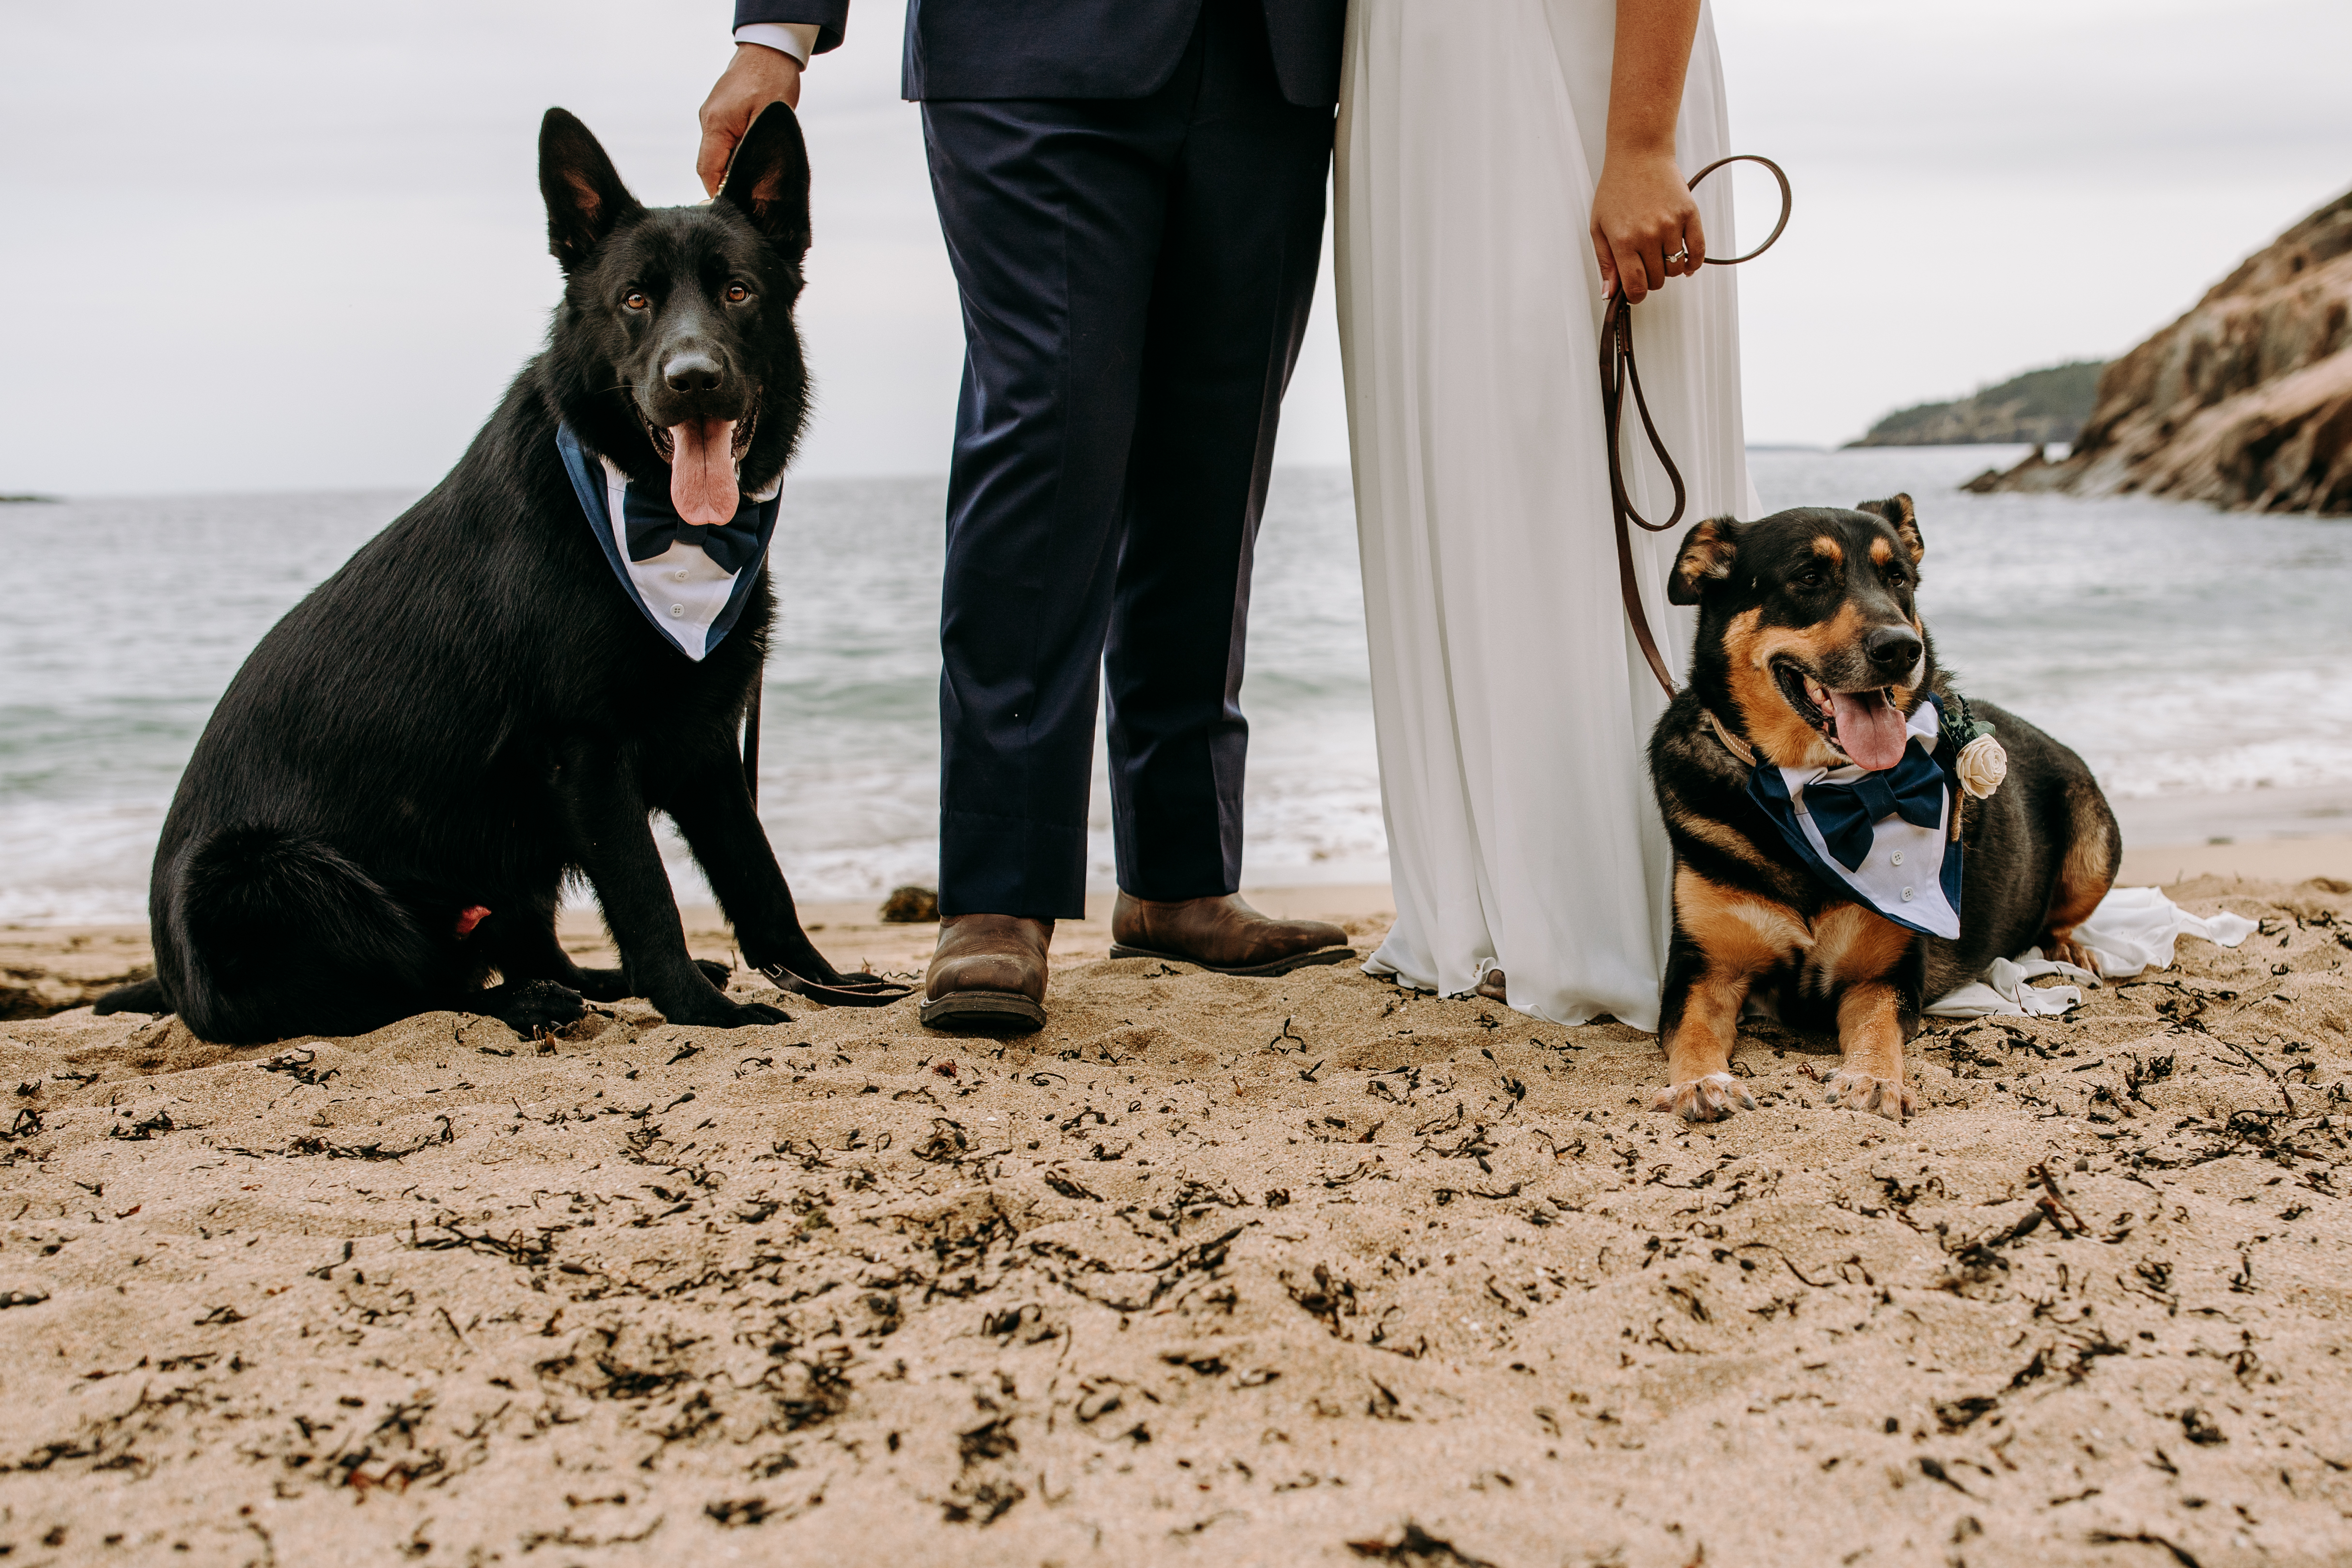 Acadia National Park Elopement with dogs on Sand Beach in Bar Harbor Maine. Bride and groom on the beach with dogs adventurous elopement in Maine